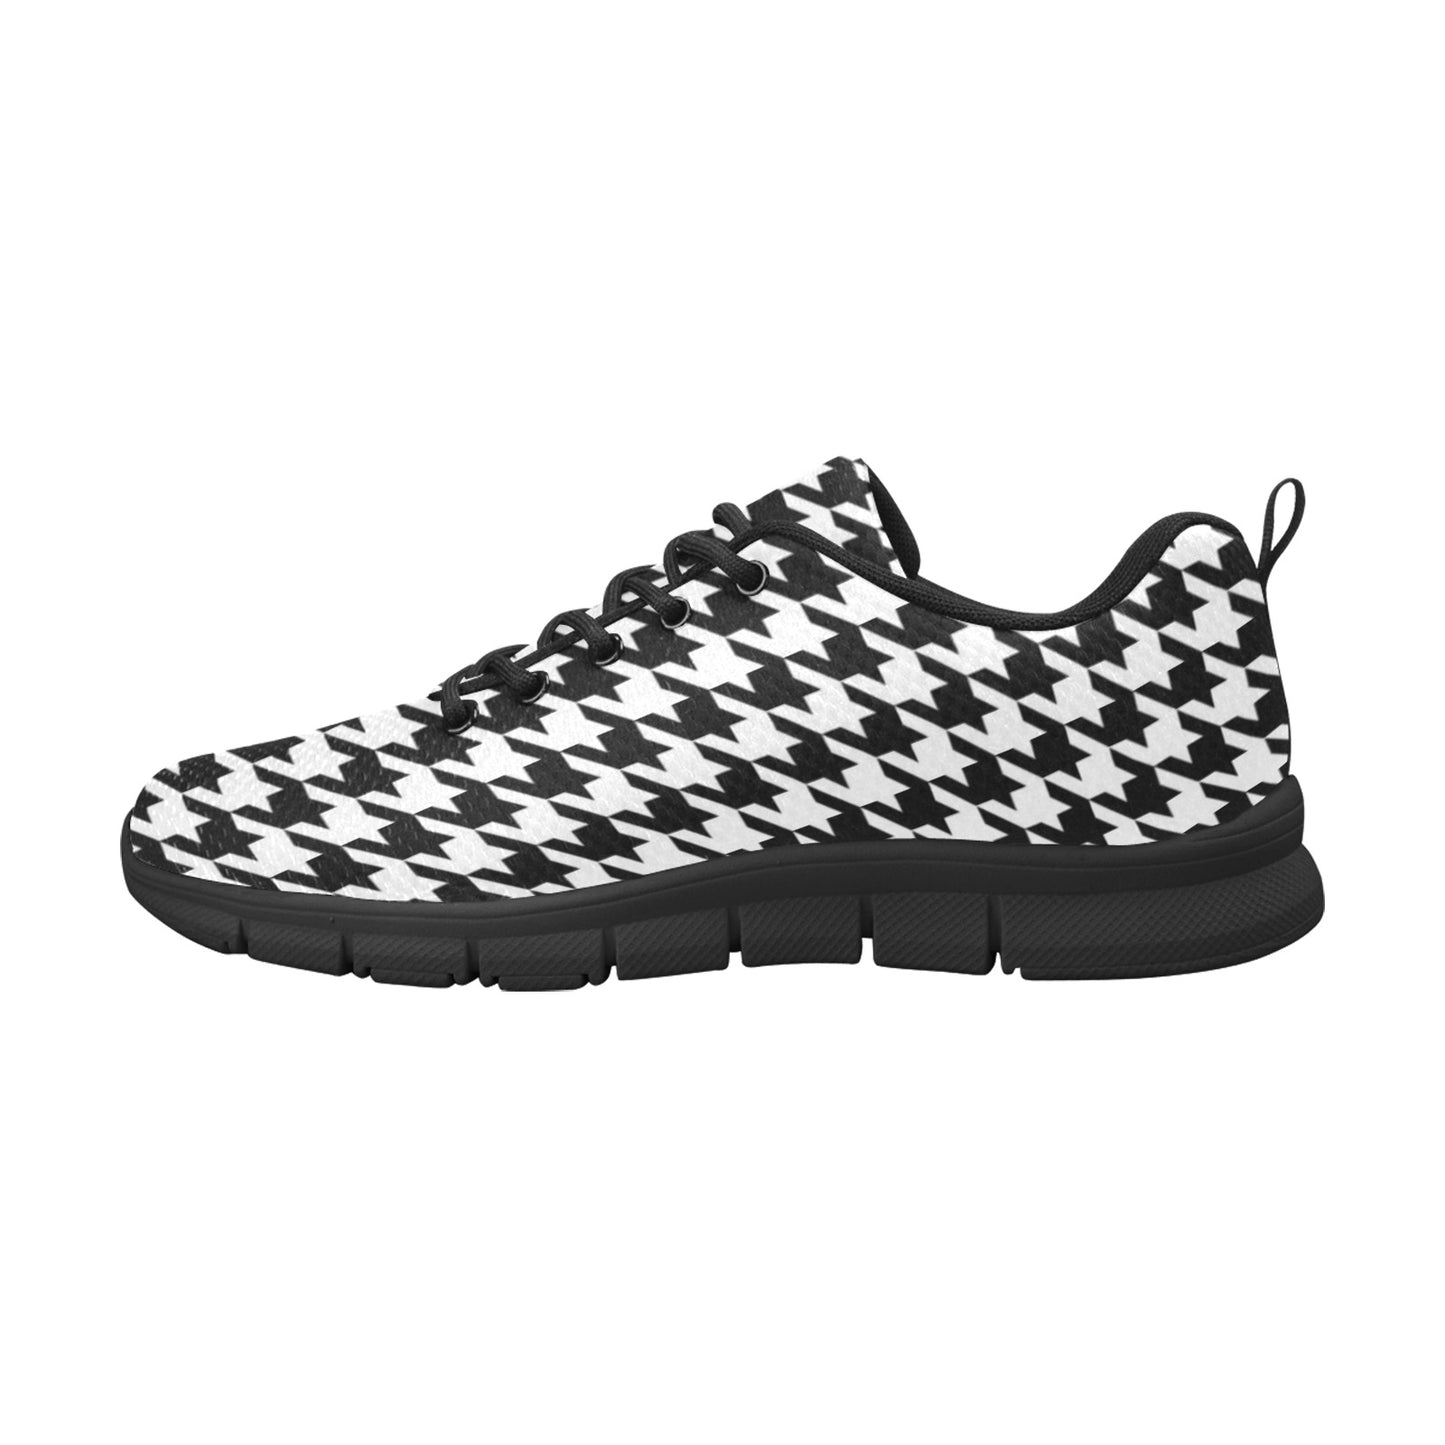 Houndstooth Men Breathable Sneakers, Black White Pattern Print Lace Up Running Custom Designer Casual Mesh Large Size Shoes Starcove Fashion